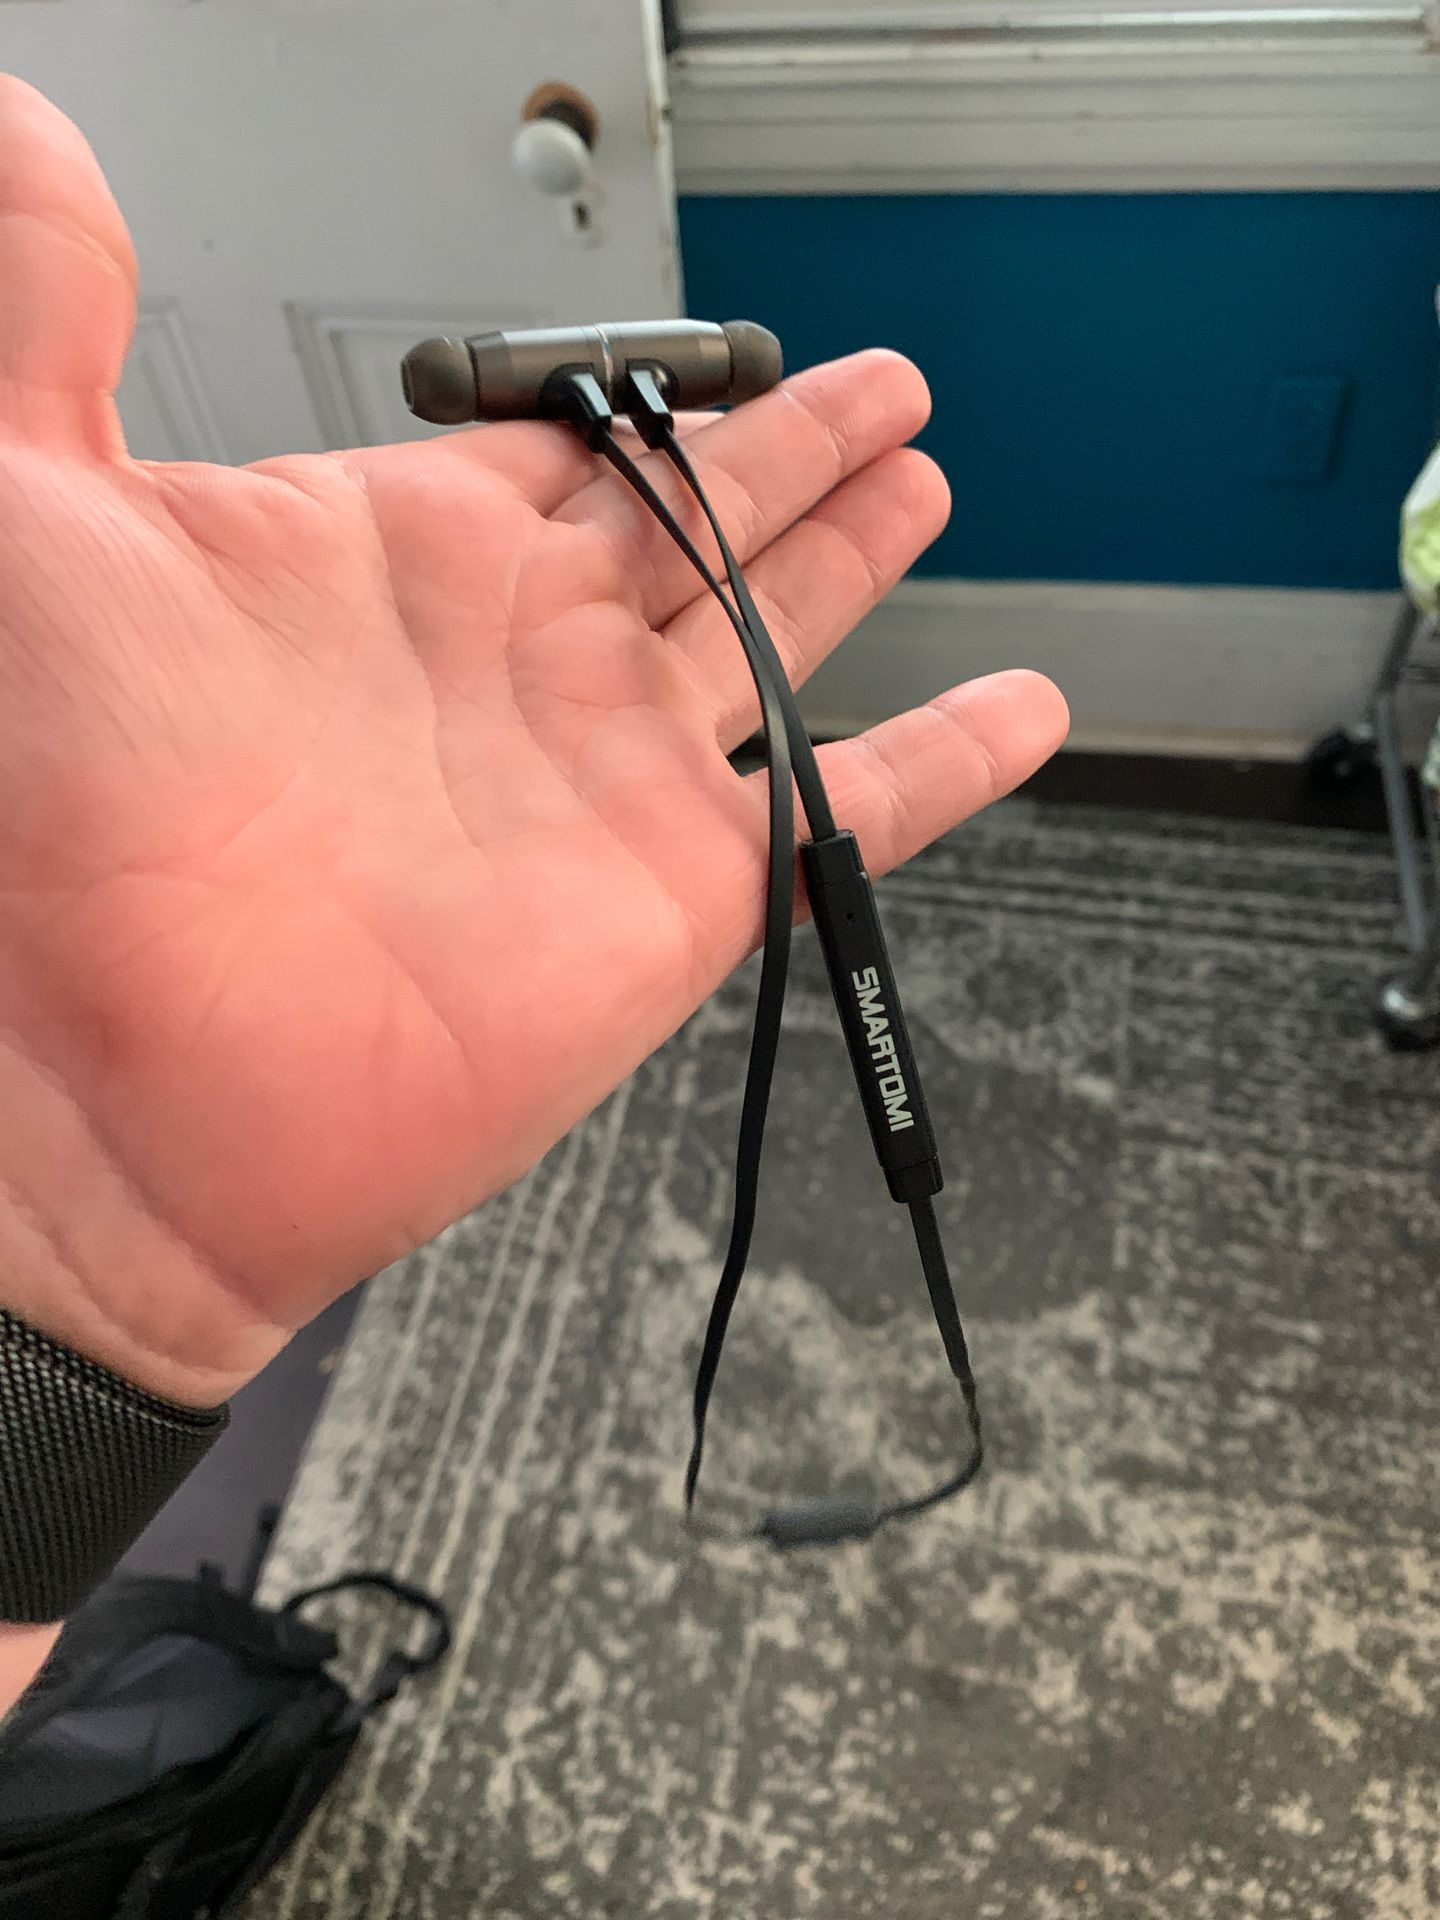 Bluetooth earbuds for working out